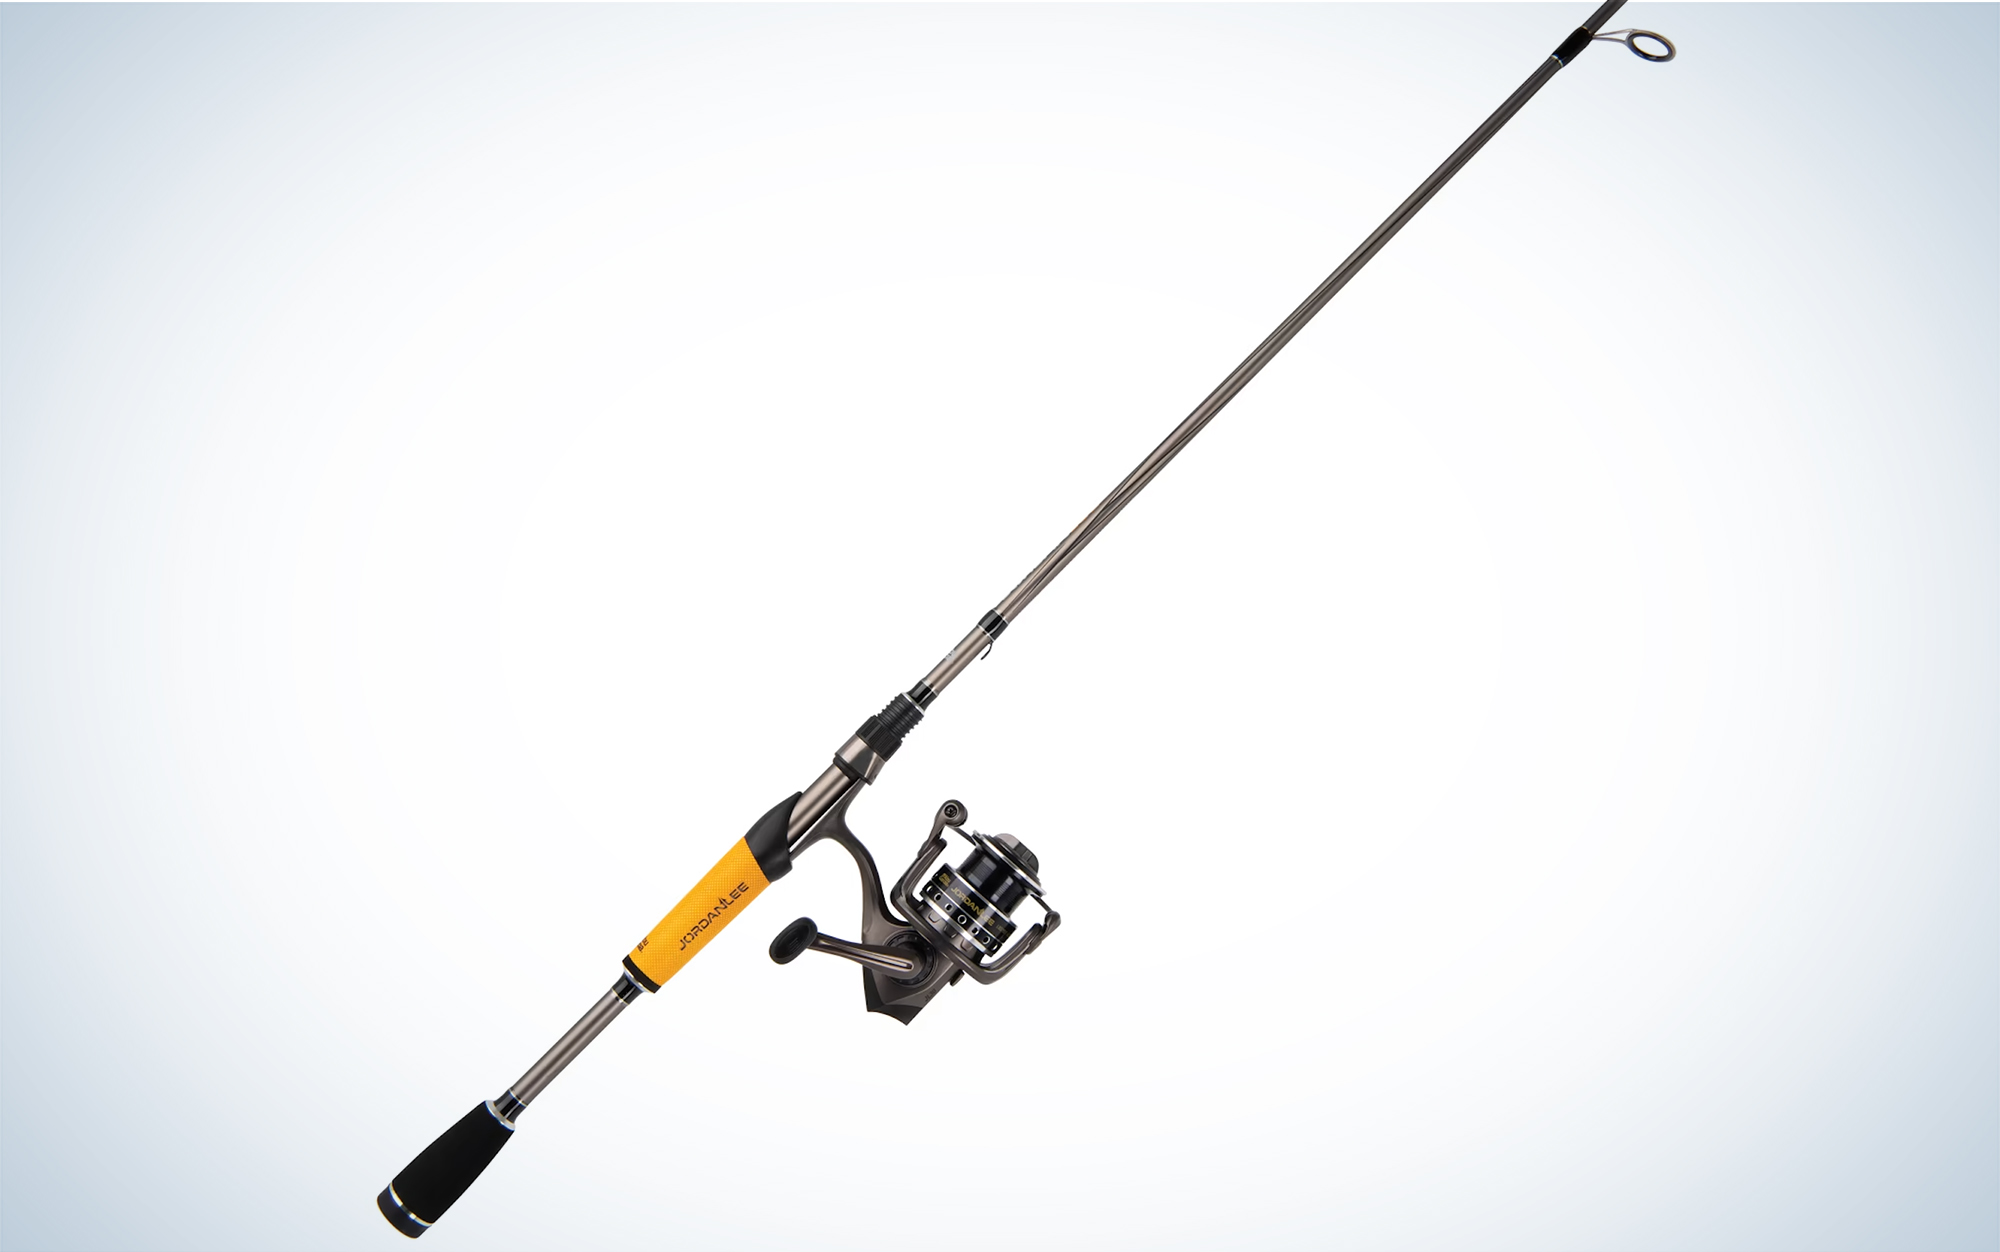 The Abu Garcia Jordan Lee Spinning Rod 7' Medium is the best budget finesse rod for bass fishing.